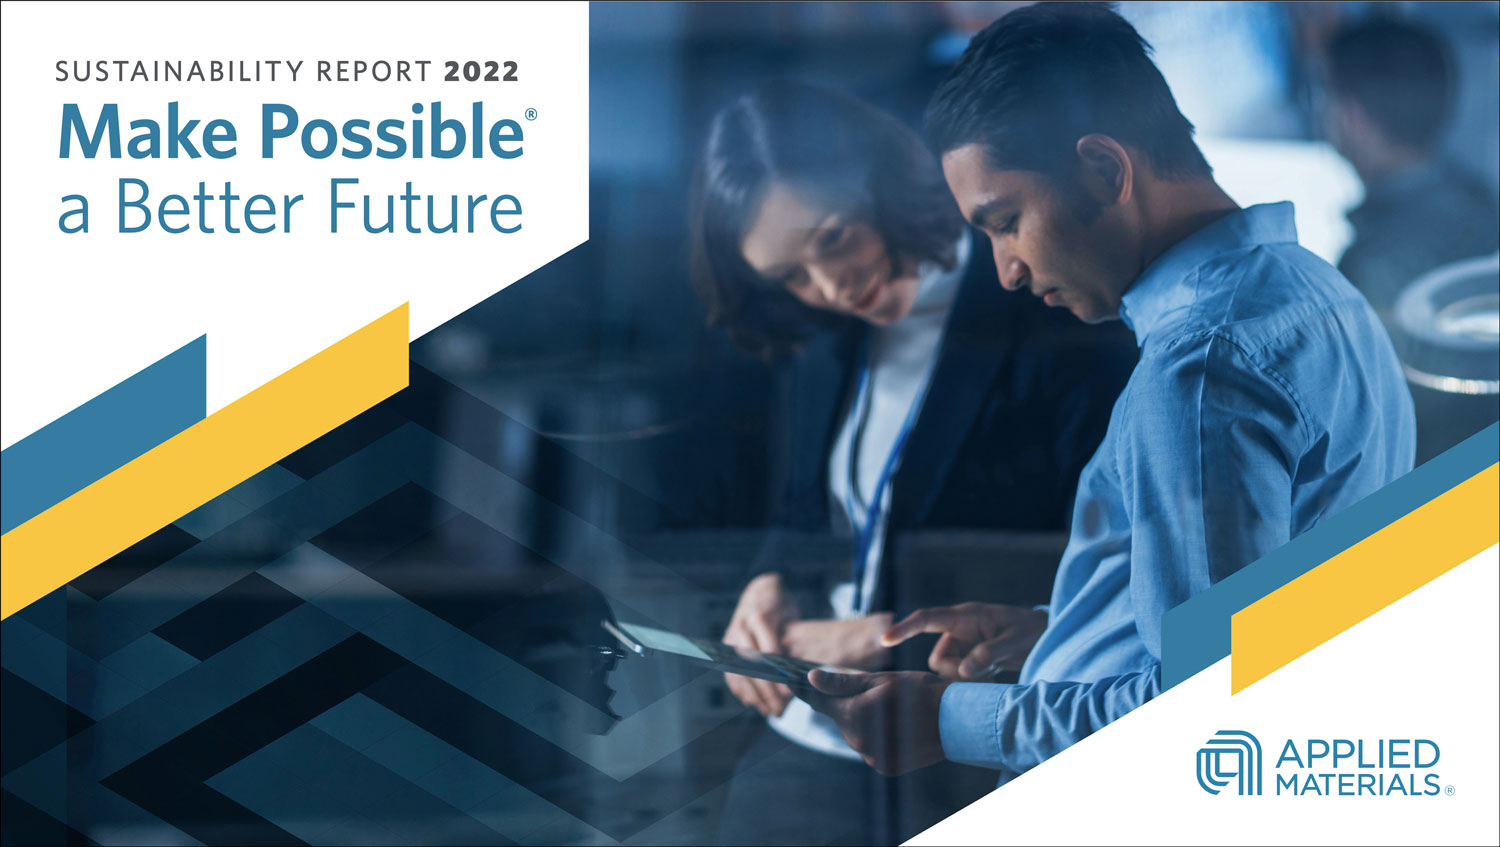 Applied Materials 2022 Sustainability Report